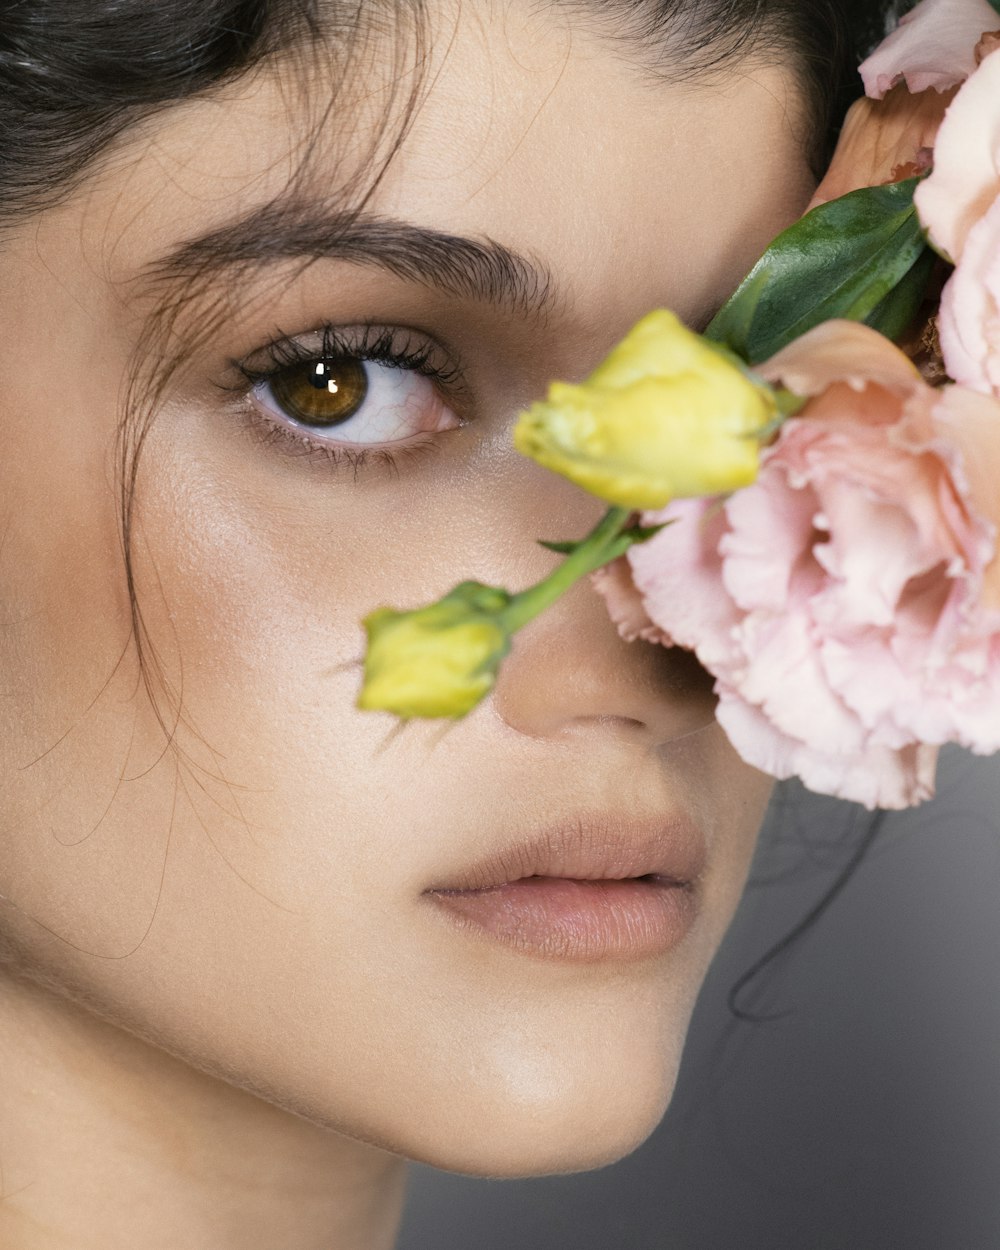 a close up of a person with flowers in their eyes